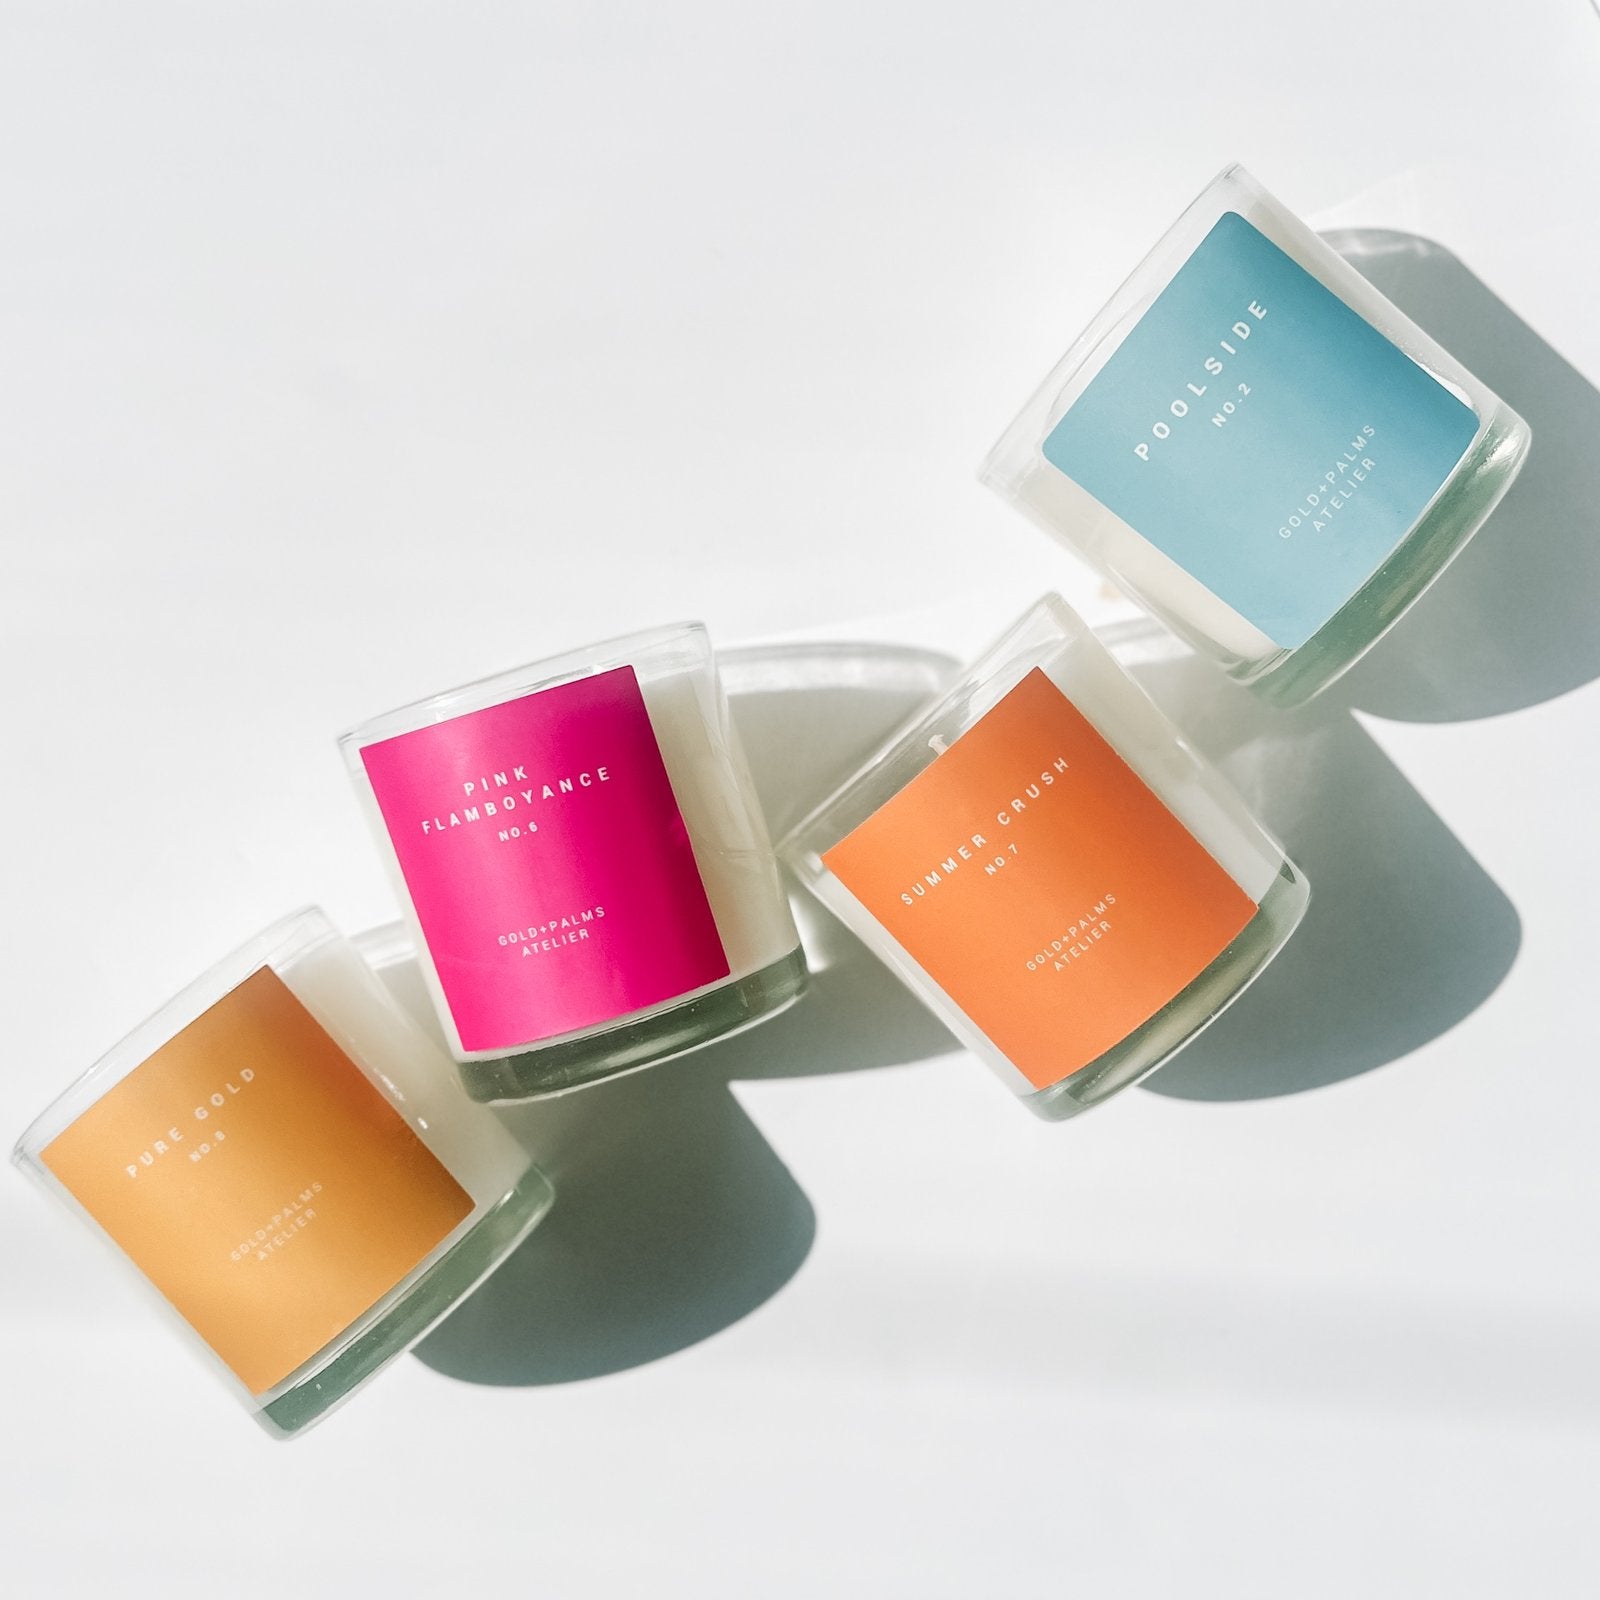 hotel inspired candle collection with colorful labels against white background